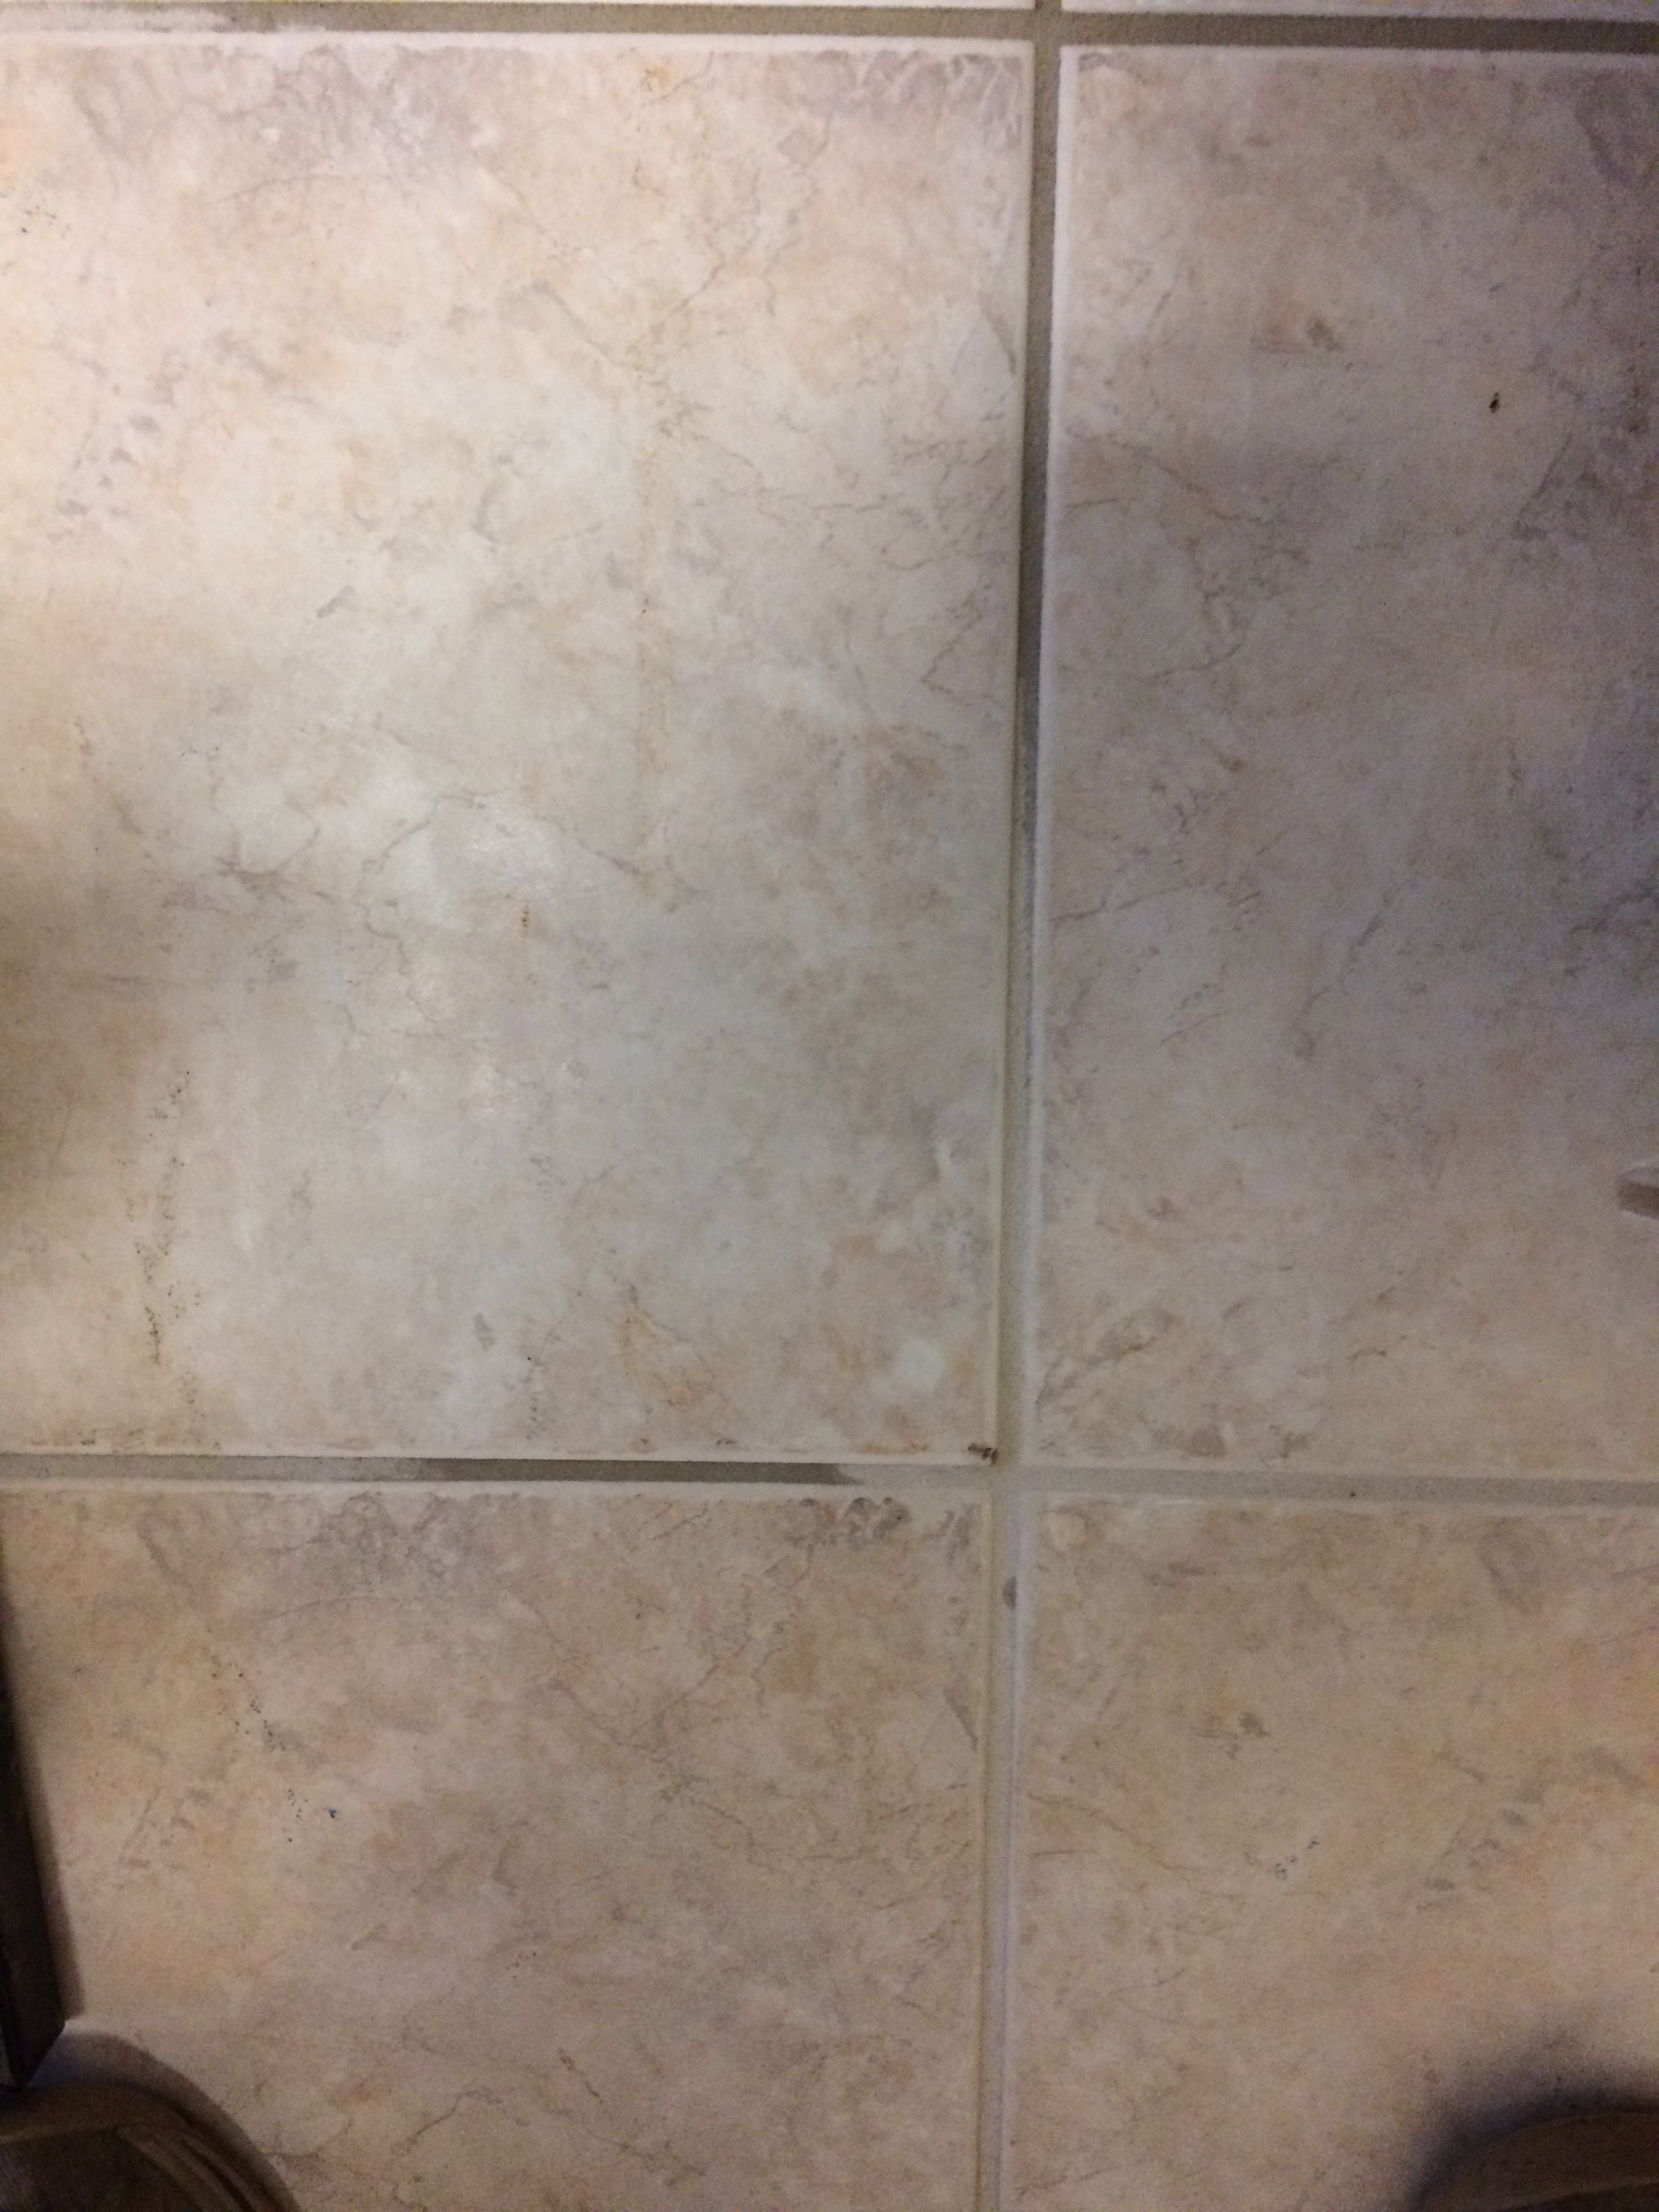 Cleaned rust stained tile floor